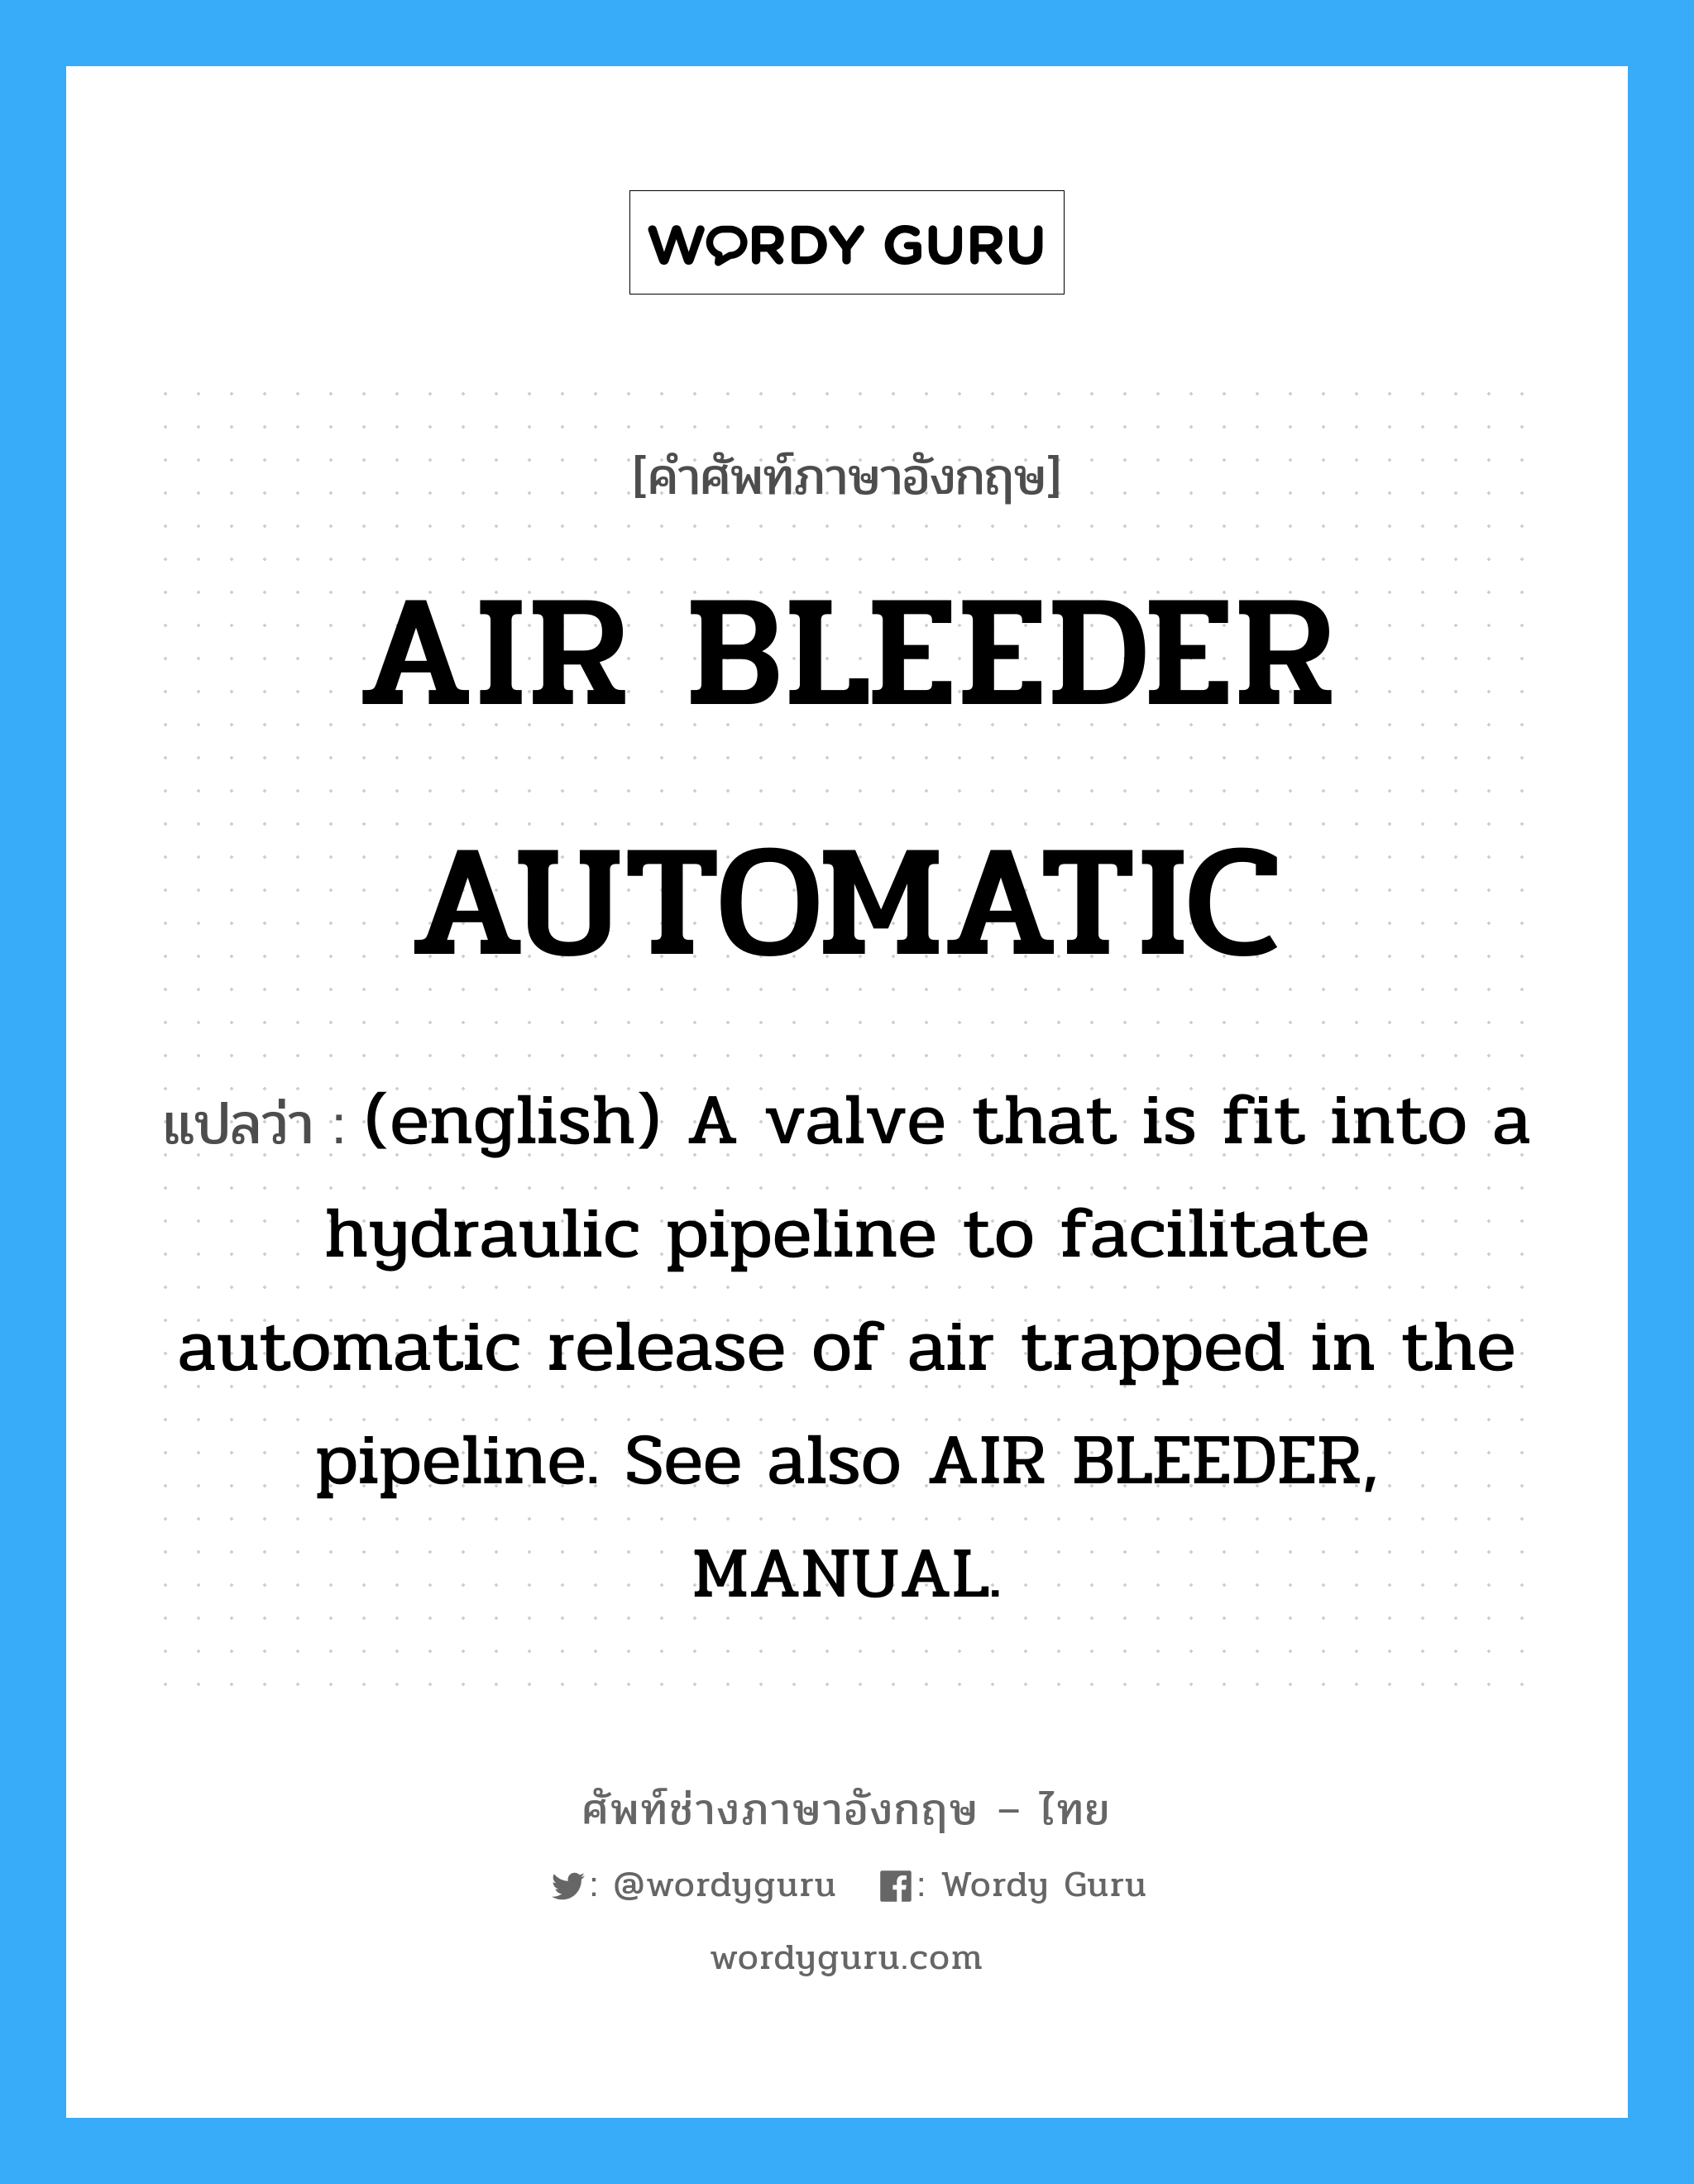 AIR BLEEDER AUTOMATIC แปลว่า?, คำศัพท์ช่างภาษาอังกฤษ - ไทย AIR BLEEDER AUTOMATIC คำศัพท์ภาษาอังกฤษ AIR BLEEDER AUTOMATIC แปลว่า (english) A valve that is fit into a hydraulic pipeline to facilitate automatic release of air trapped in the pipeline. See also AIR BLEEDER, MANUAL.